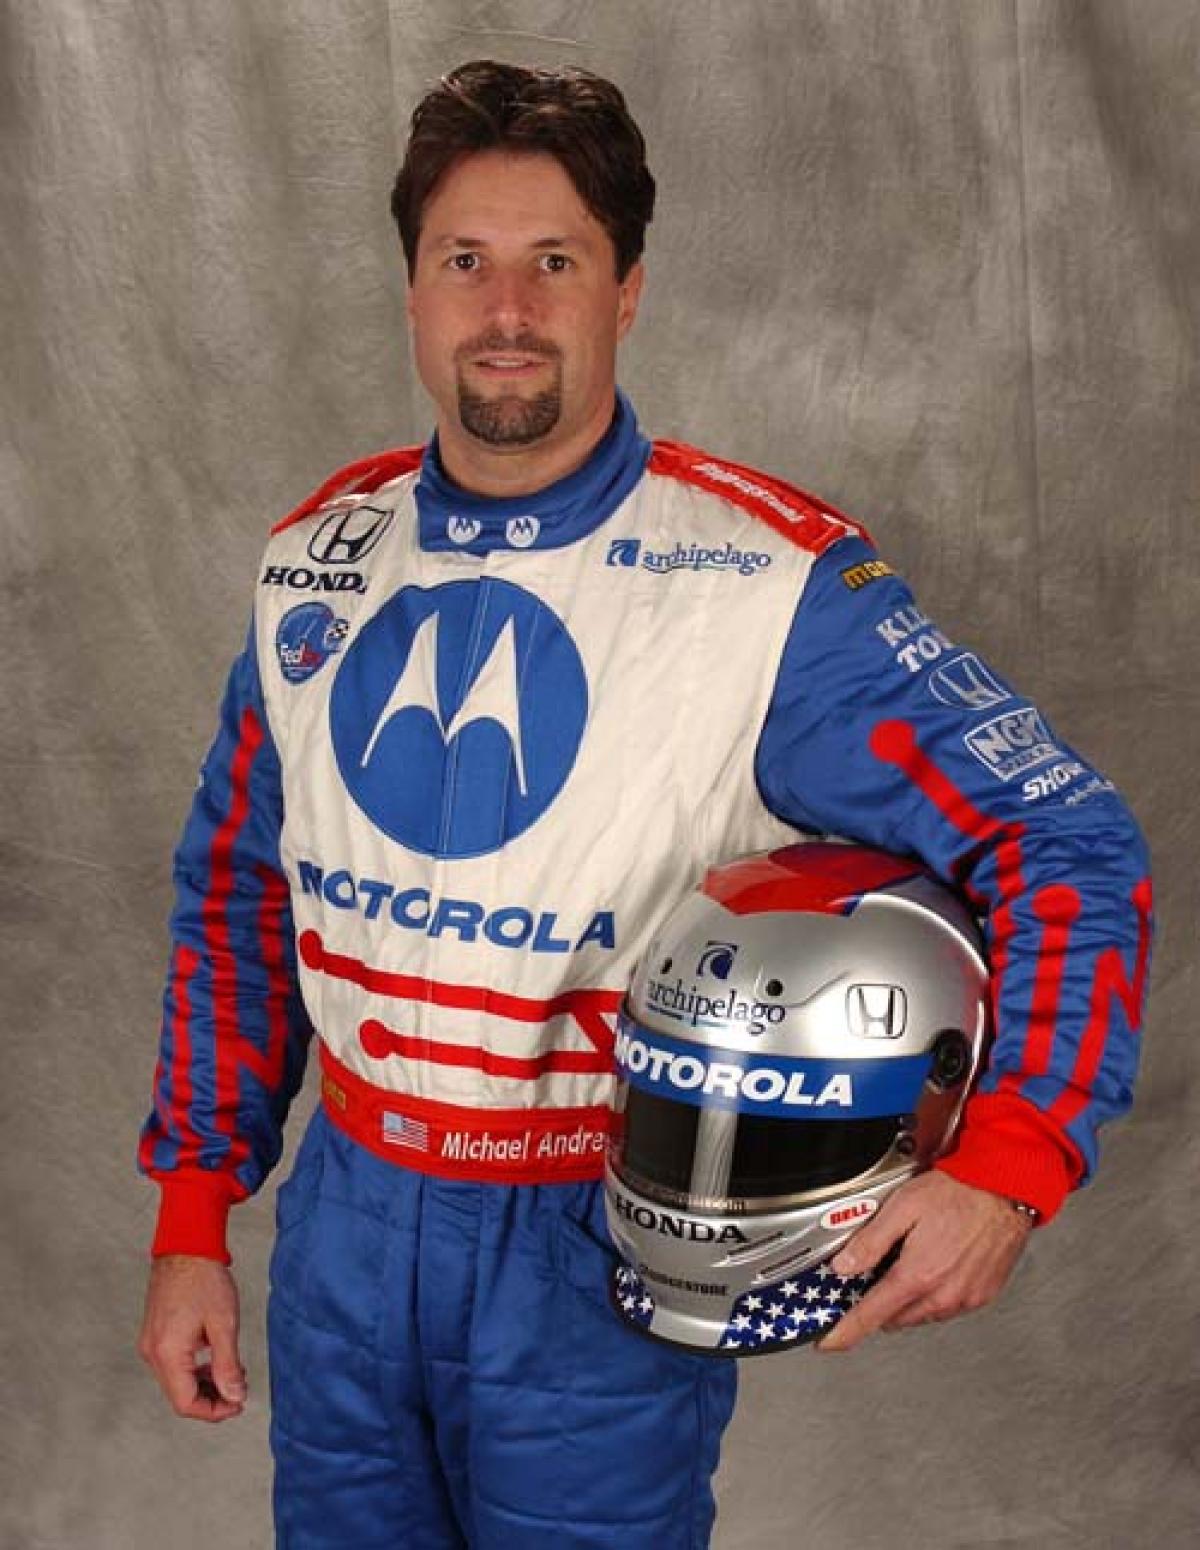 2002 MICHAEL ANDRETTI signed INDIANAPOLIS 500 HERO PHOTO CARD POSTCARD INDY CAR 